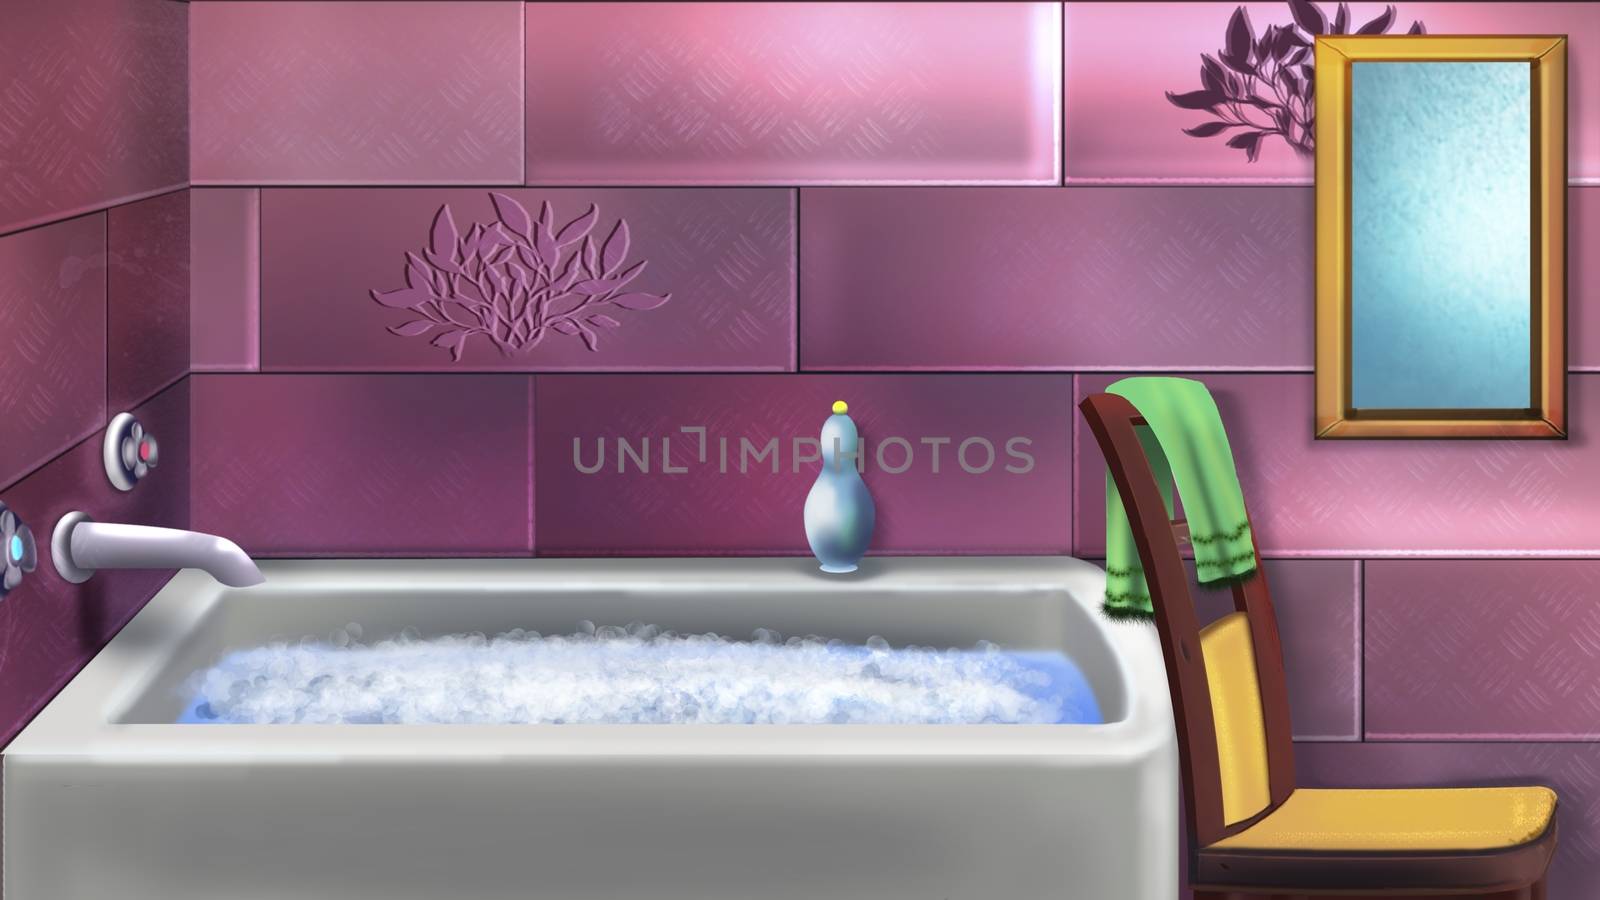 Digital painting of the Children's bathroom in pink